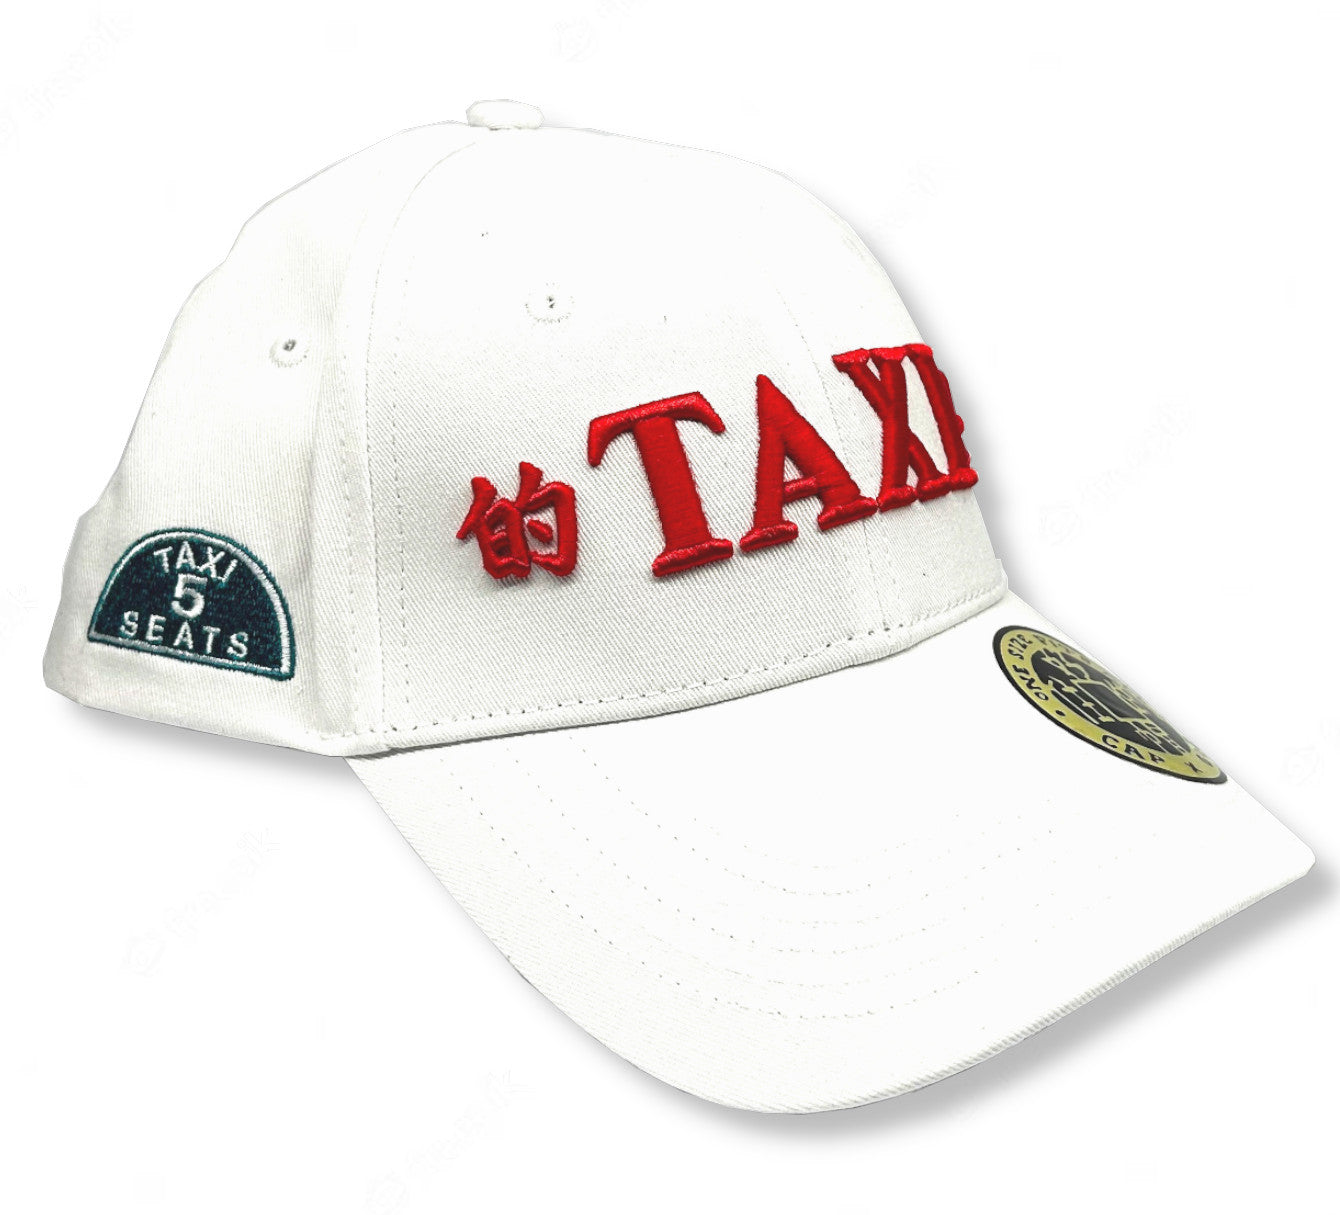 'TAXI' 3D Baseball Cap, White/Red